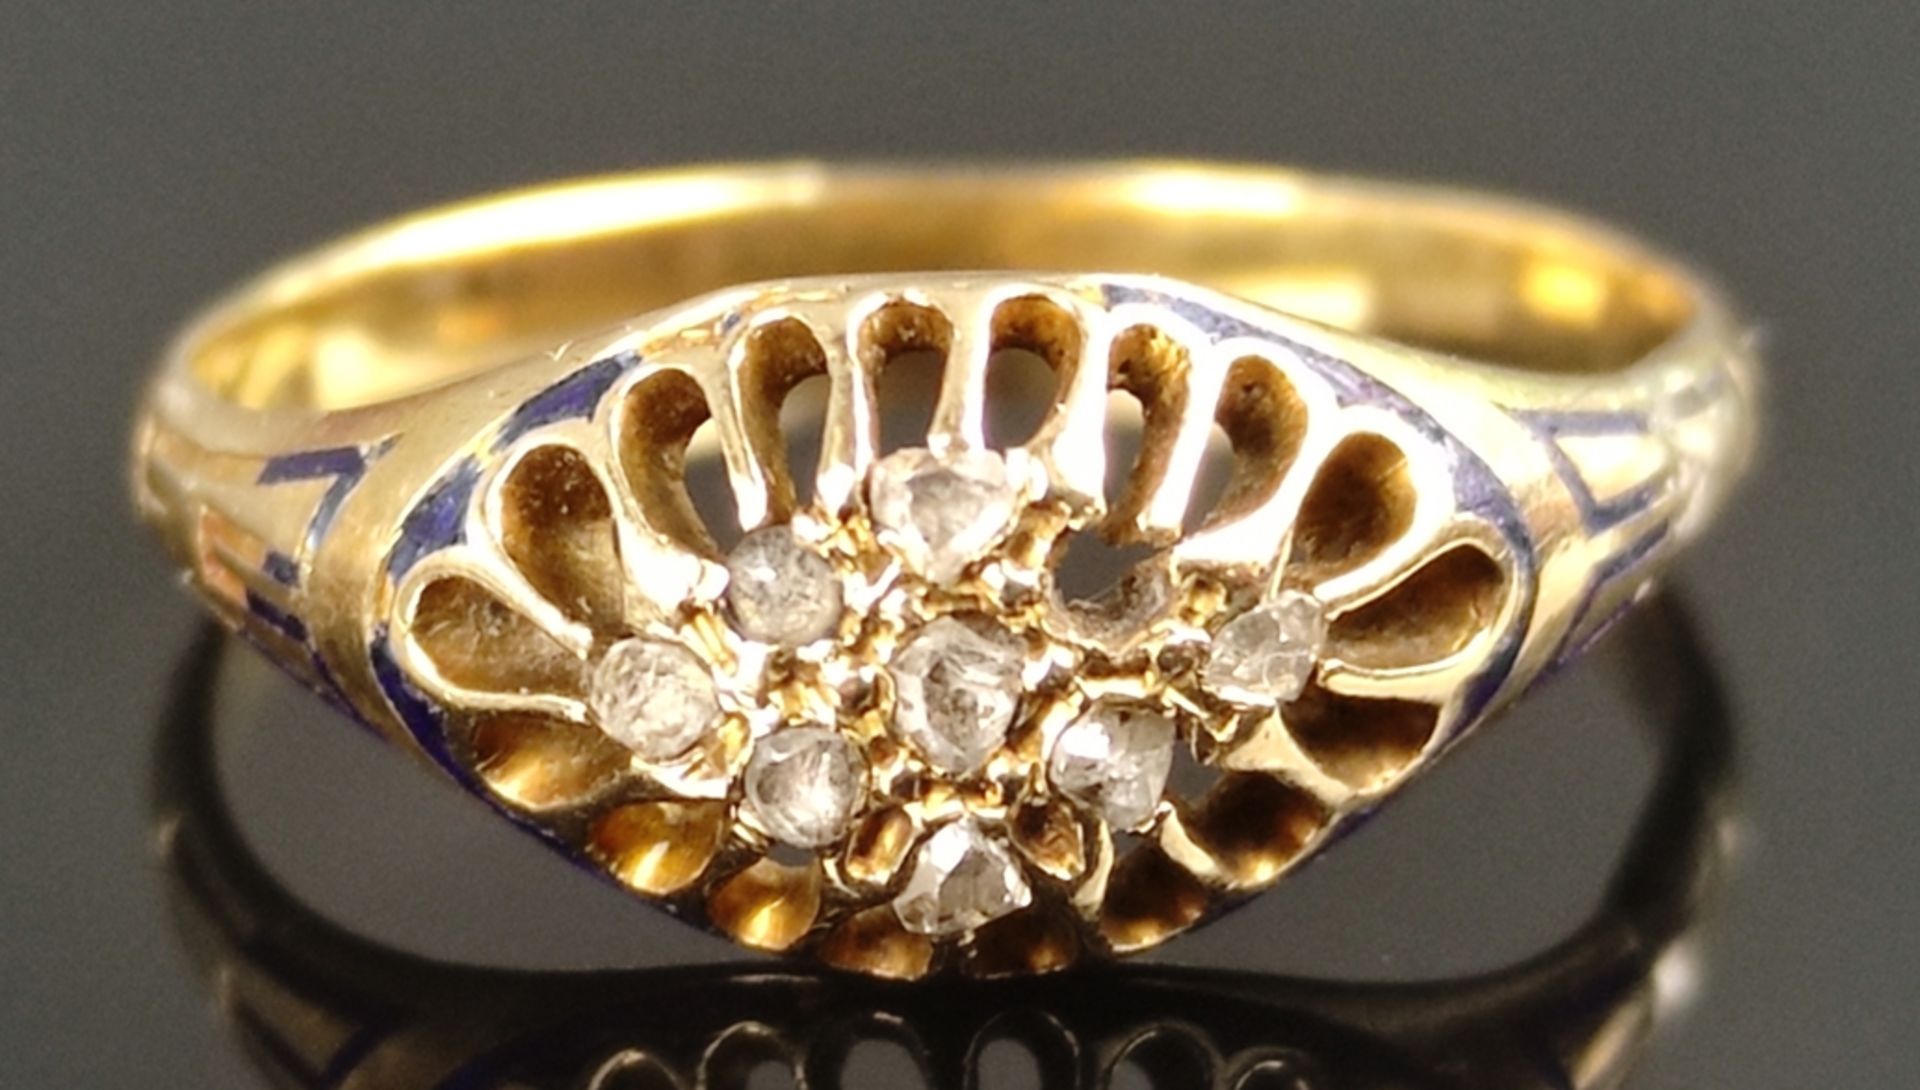 Antique ring, center widened ring band with 8 small diamonds (one missing) decorated with blue enam - Image 2 of 2